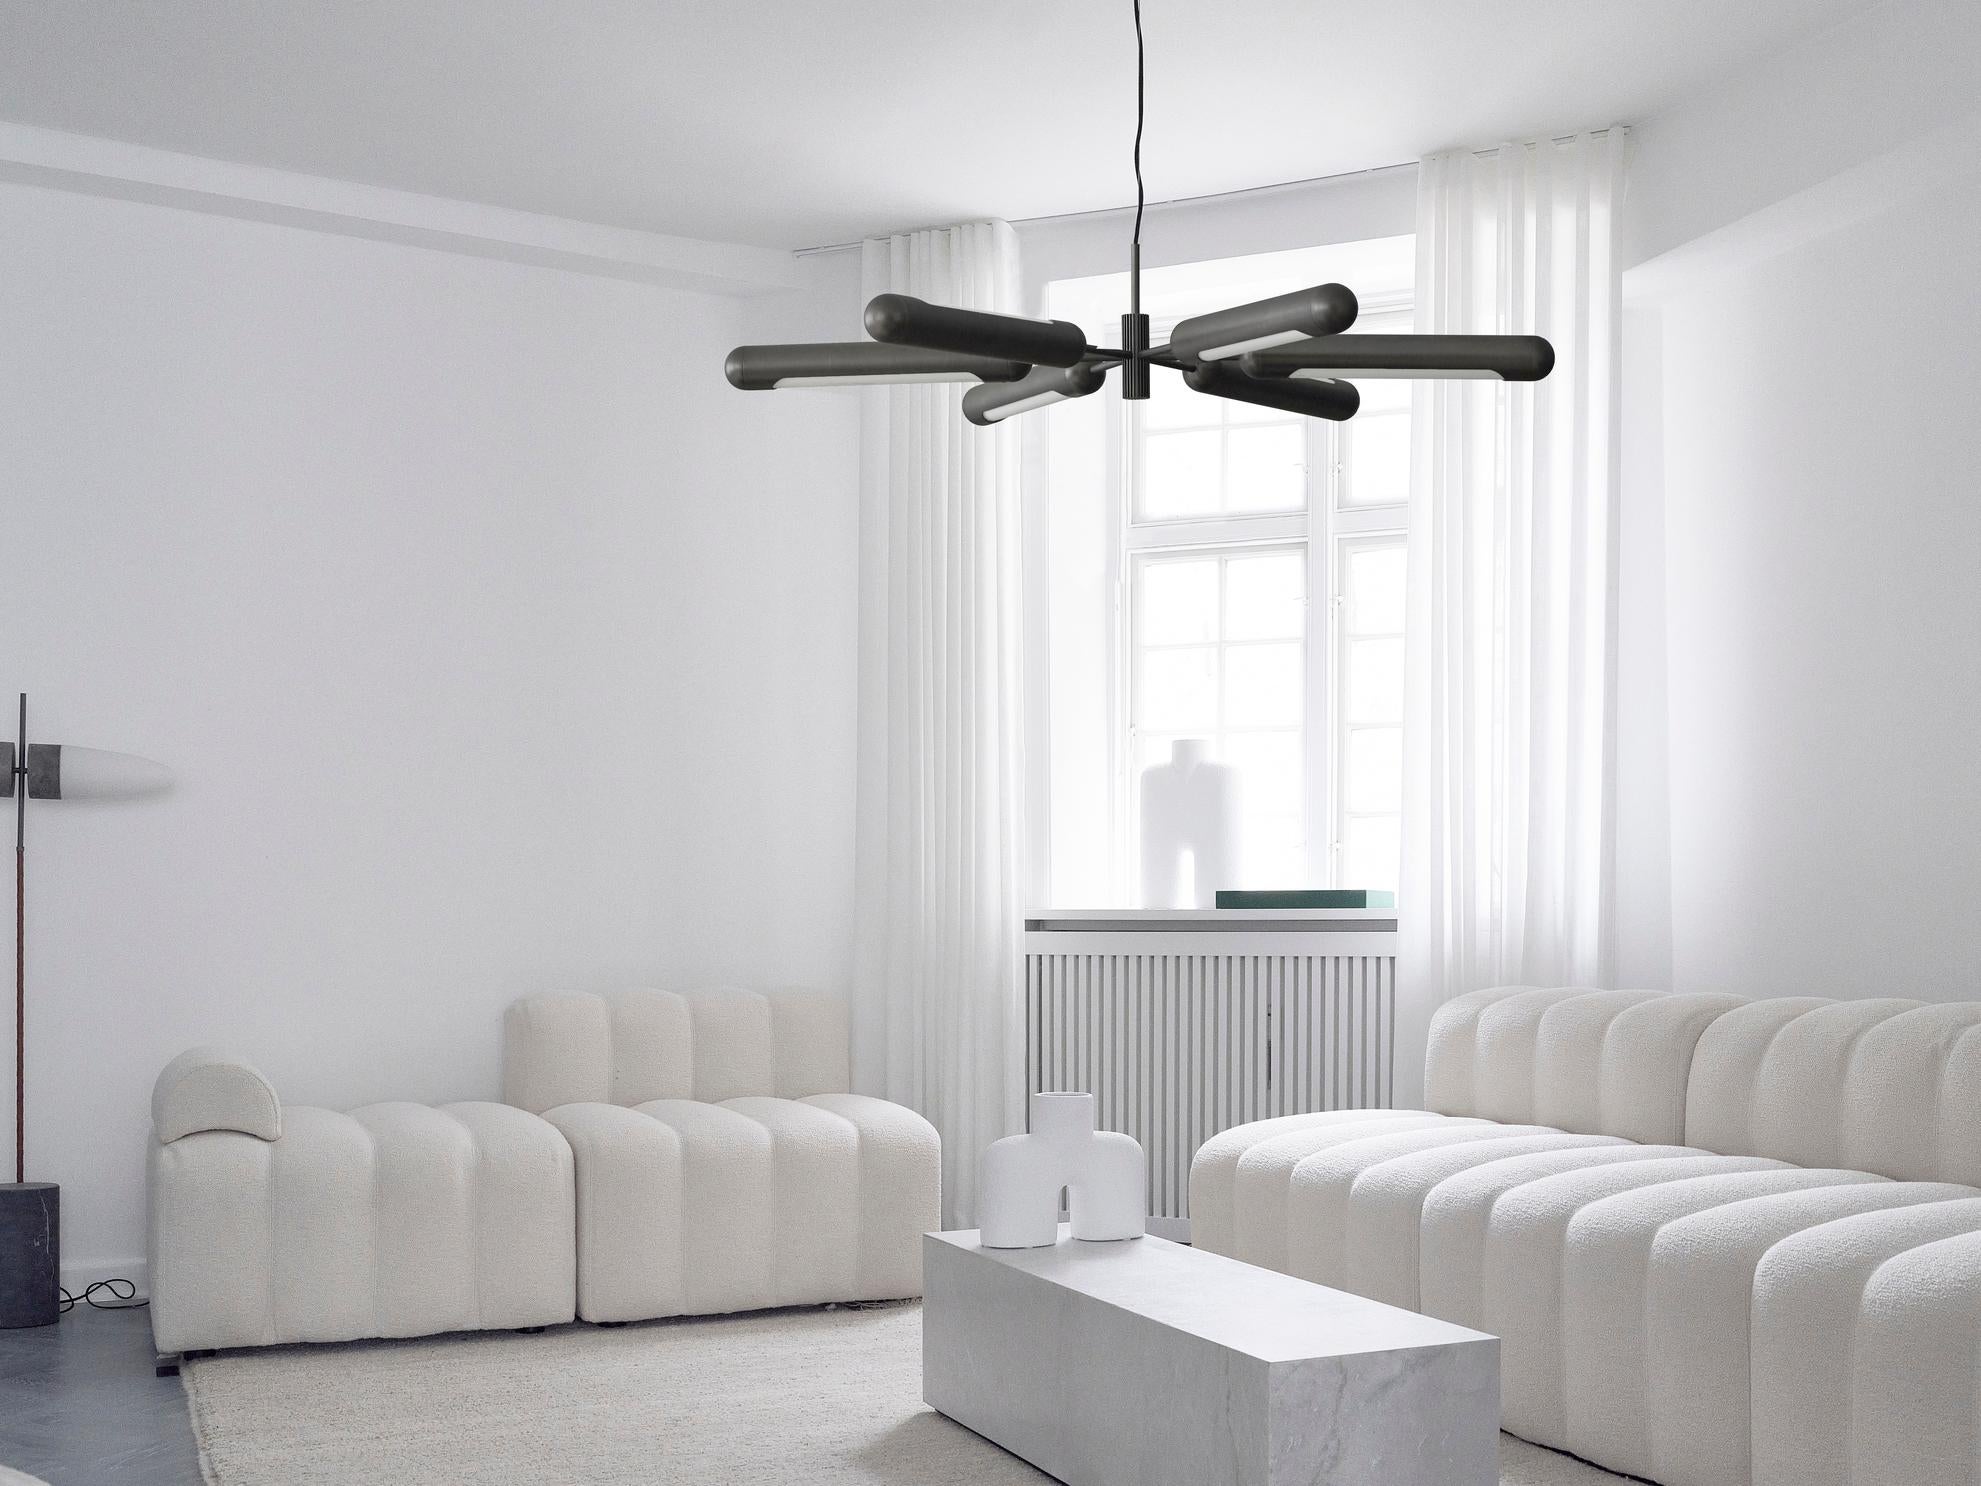 Bullet Chandelier by 101 Copenhagen
Designed by Kristian Sofus Hansen & Tommy Hyldahl.
Dimensions: L 125 x W 125 x H 32 cm
Mounting plate: H1,3 / W5,5 CM
Ceiling cup: H19,5 / W6 CM
Fabric covered cable (divided in two):
Cable 1. from 15 to 85